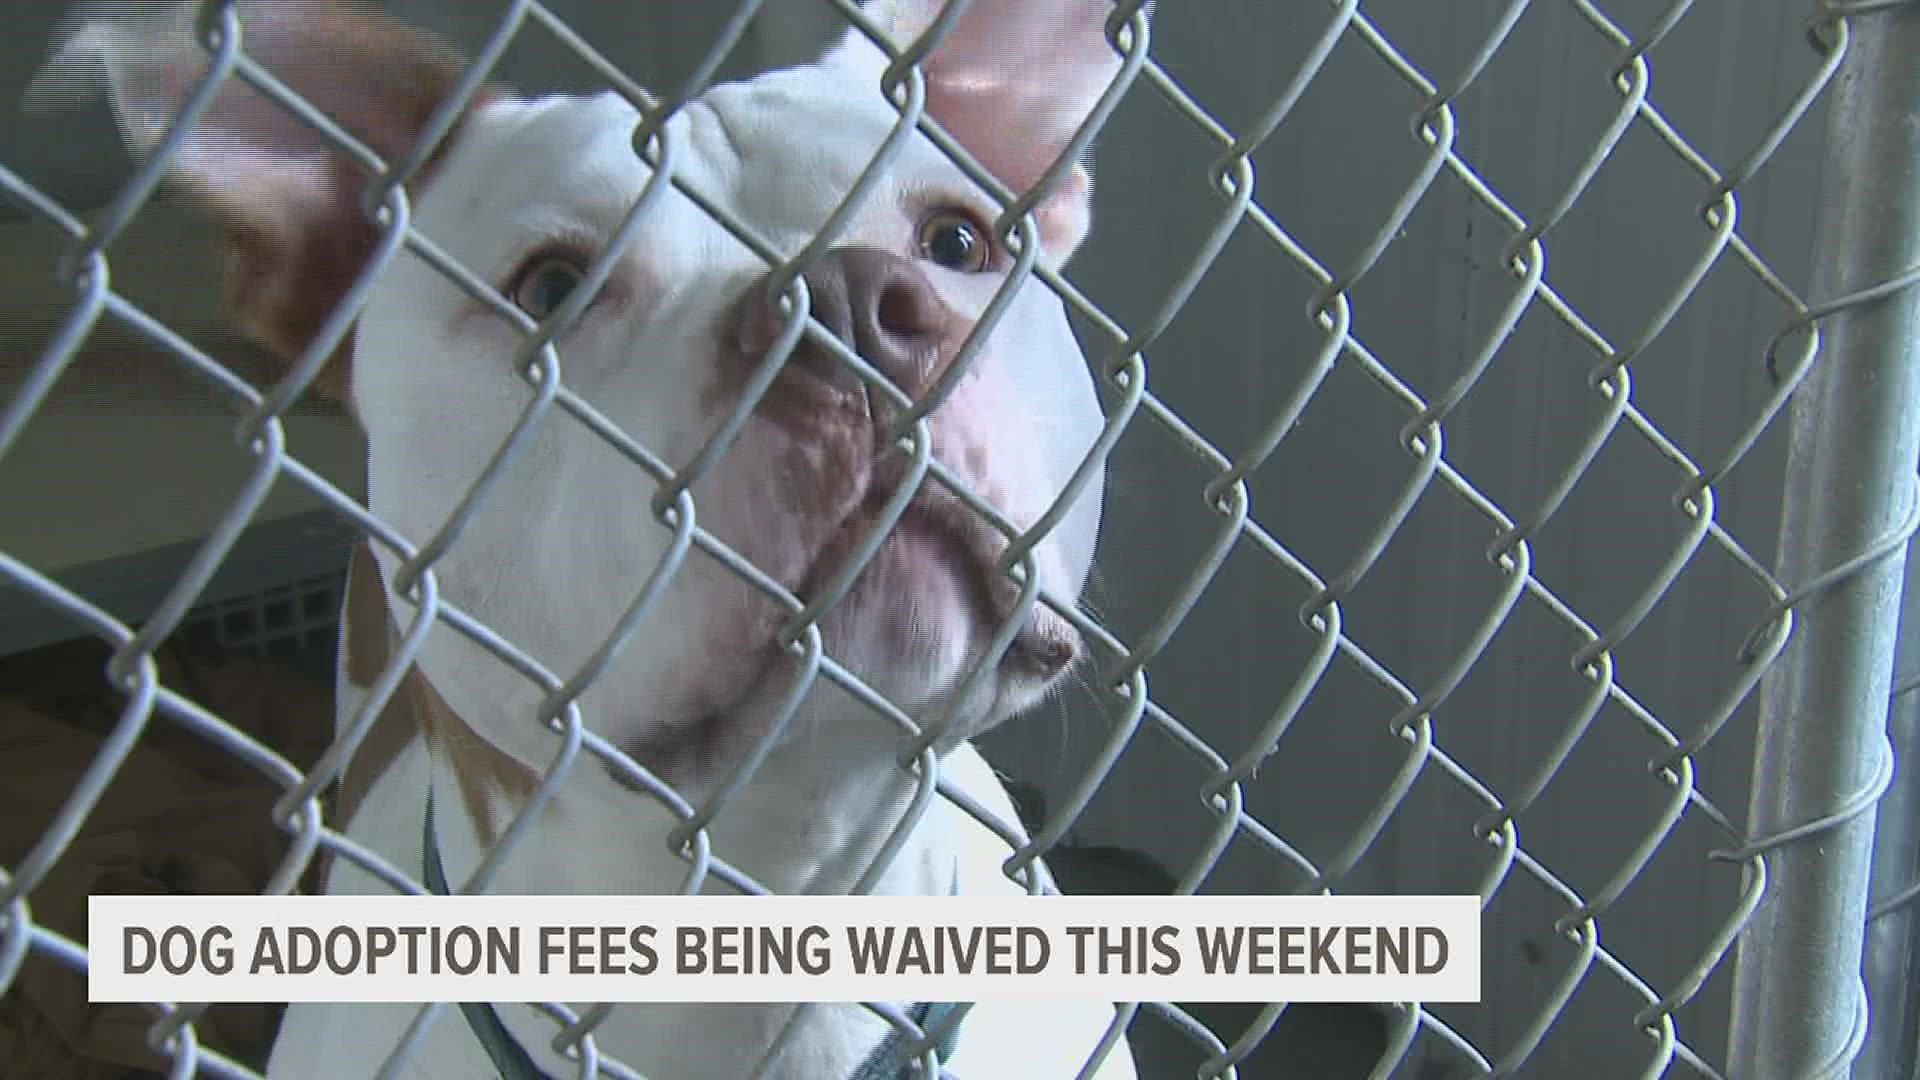 Starting at 11 a.m. on Saturday and lasting through Sunday, all fees will be waived for anyone looking to adopt one of the Scott County Humane Society's 89 dogs.